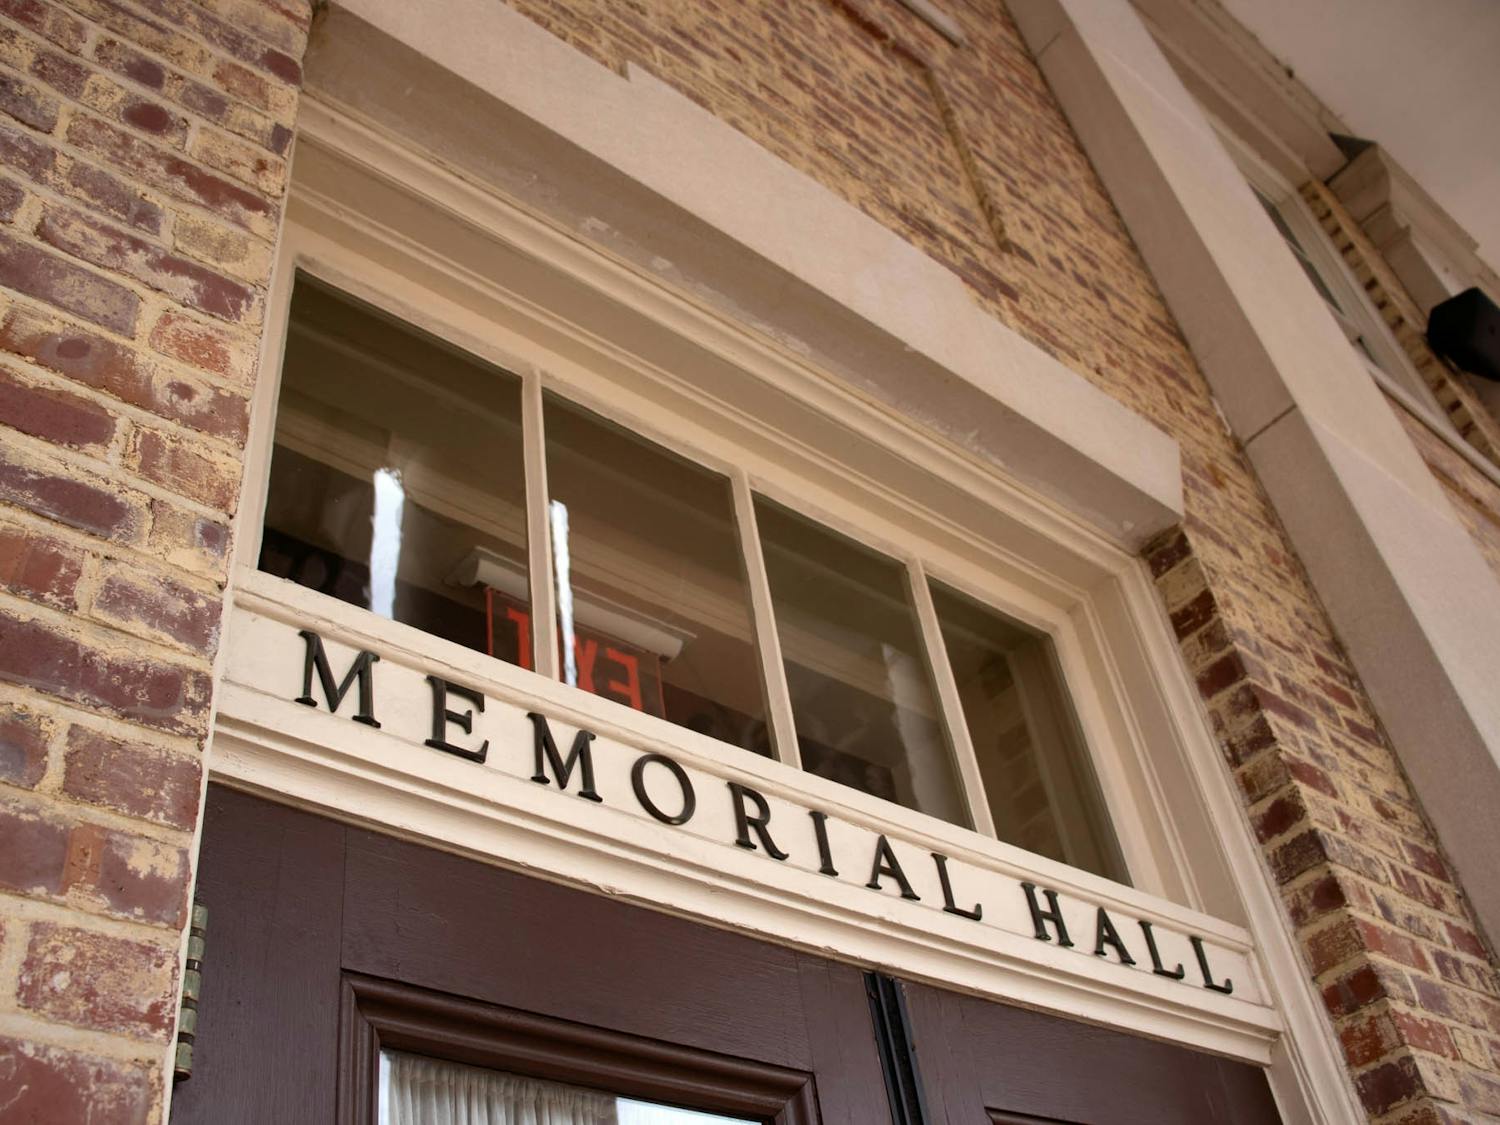 Memorial Hall is covered with plaques honoring slaveholders and Confederate soldiers, pictured here on Feb. 20, 2023.